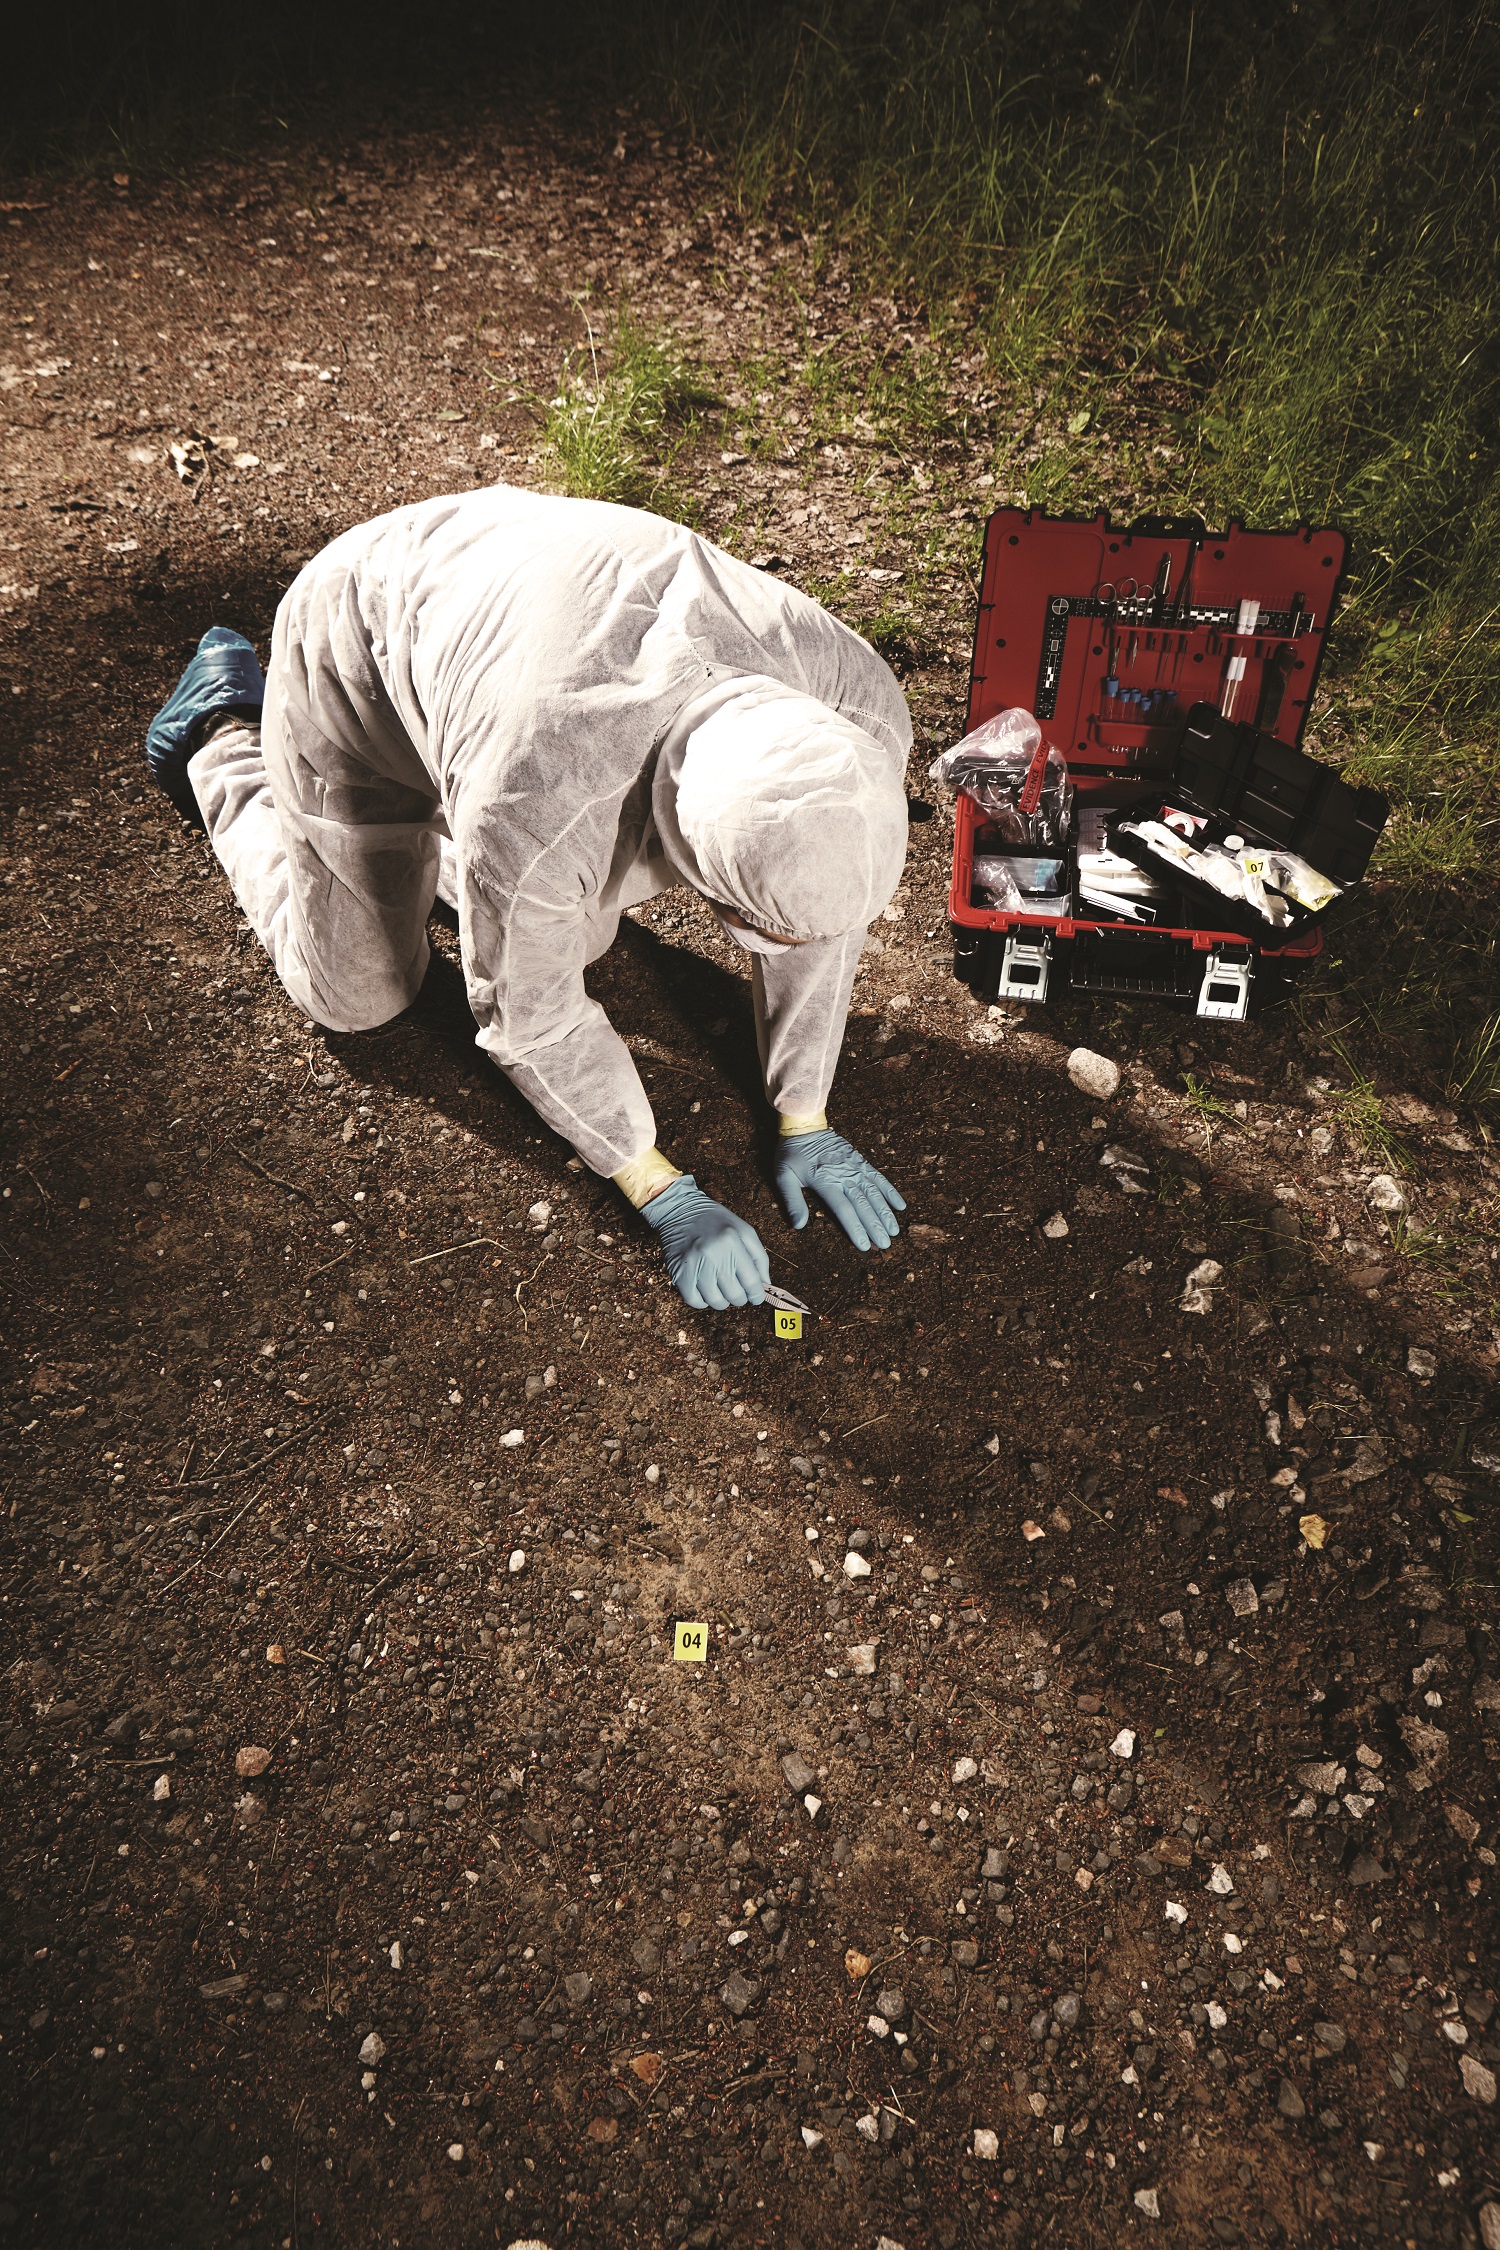 Forensic analyst in the field